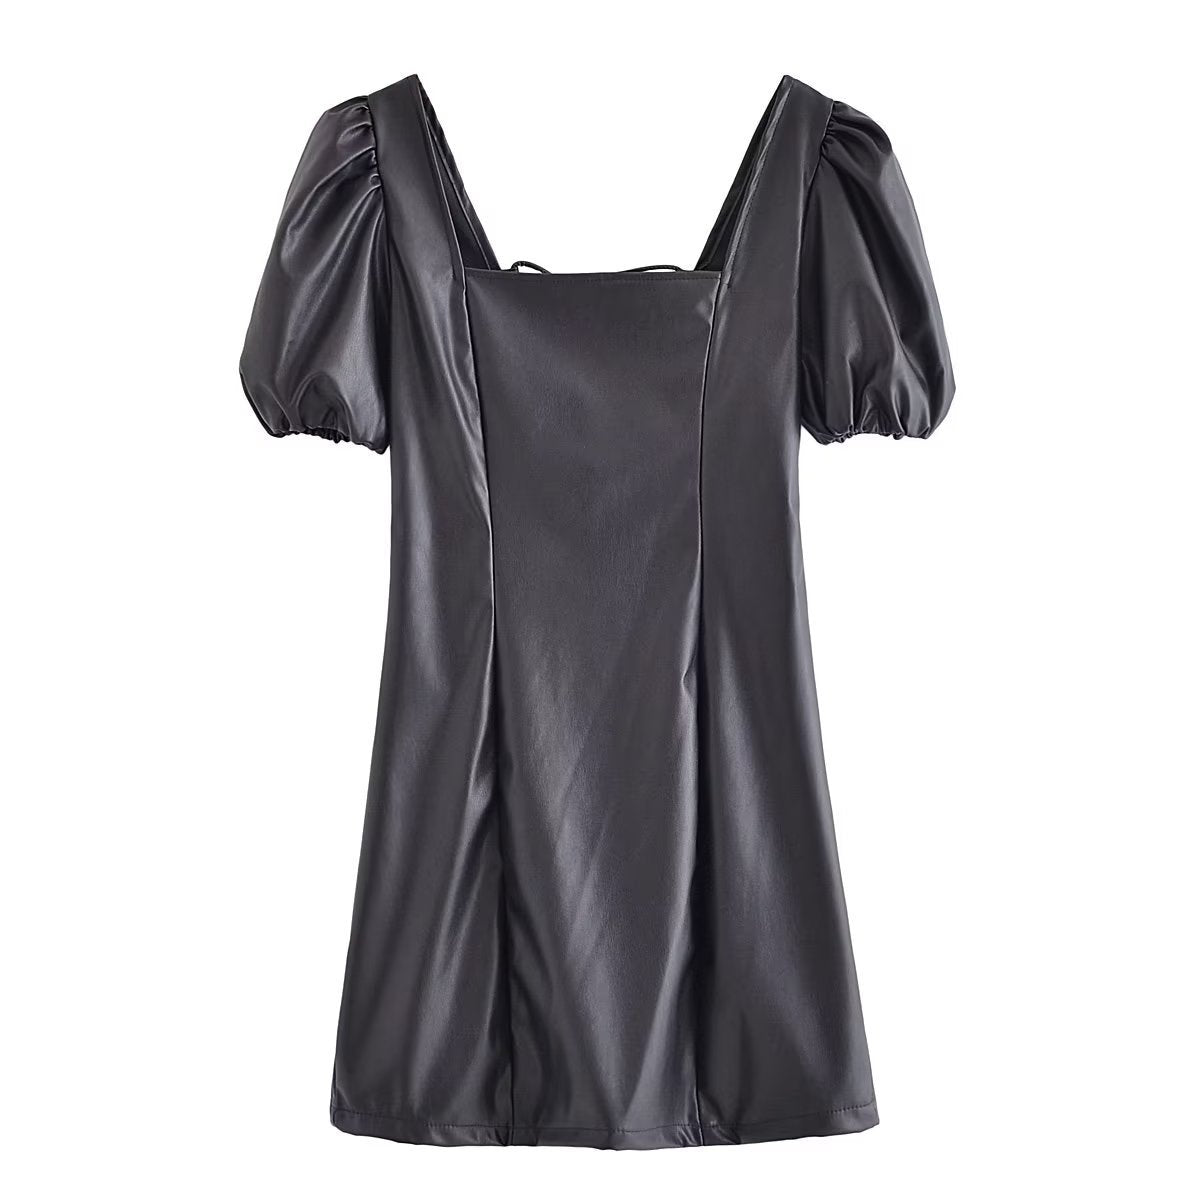 Square Collar Black Puff Sleeve Young Drawstring Strap Backless Faux Leather Dress